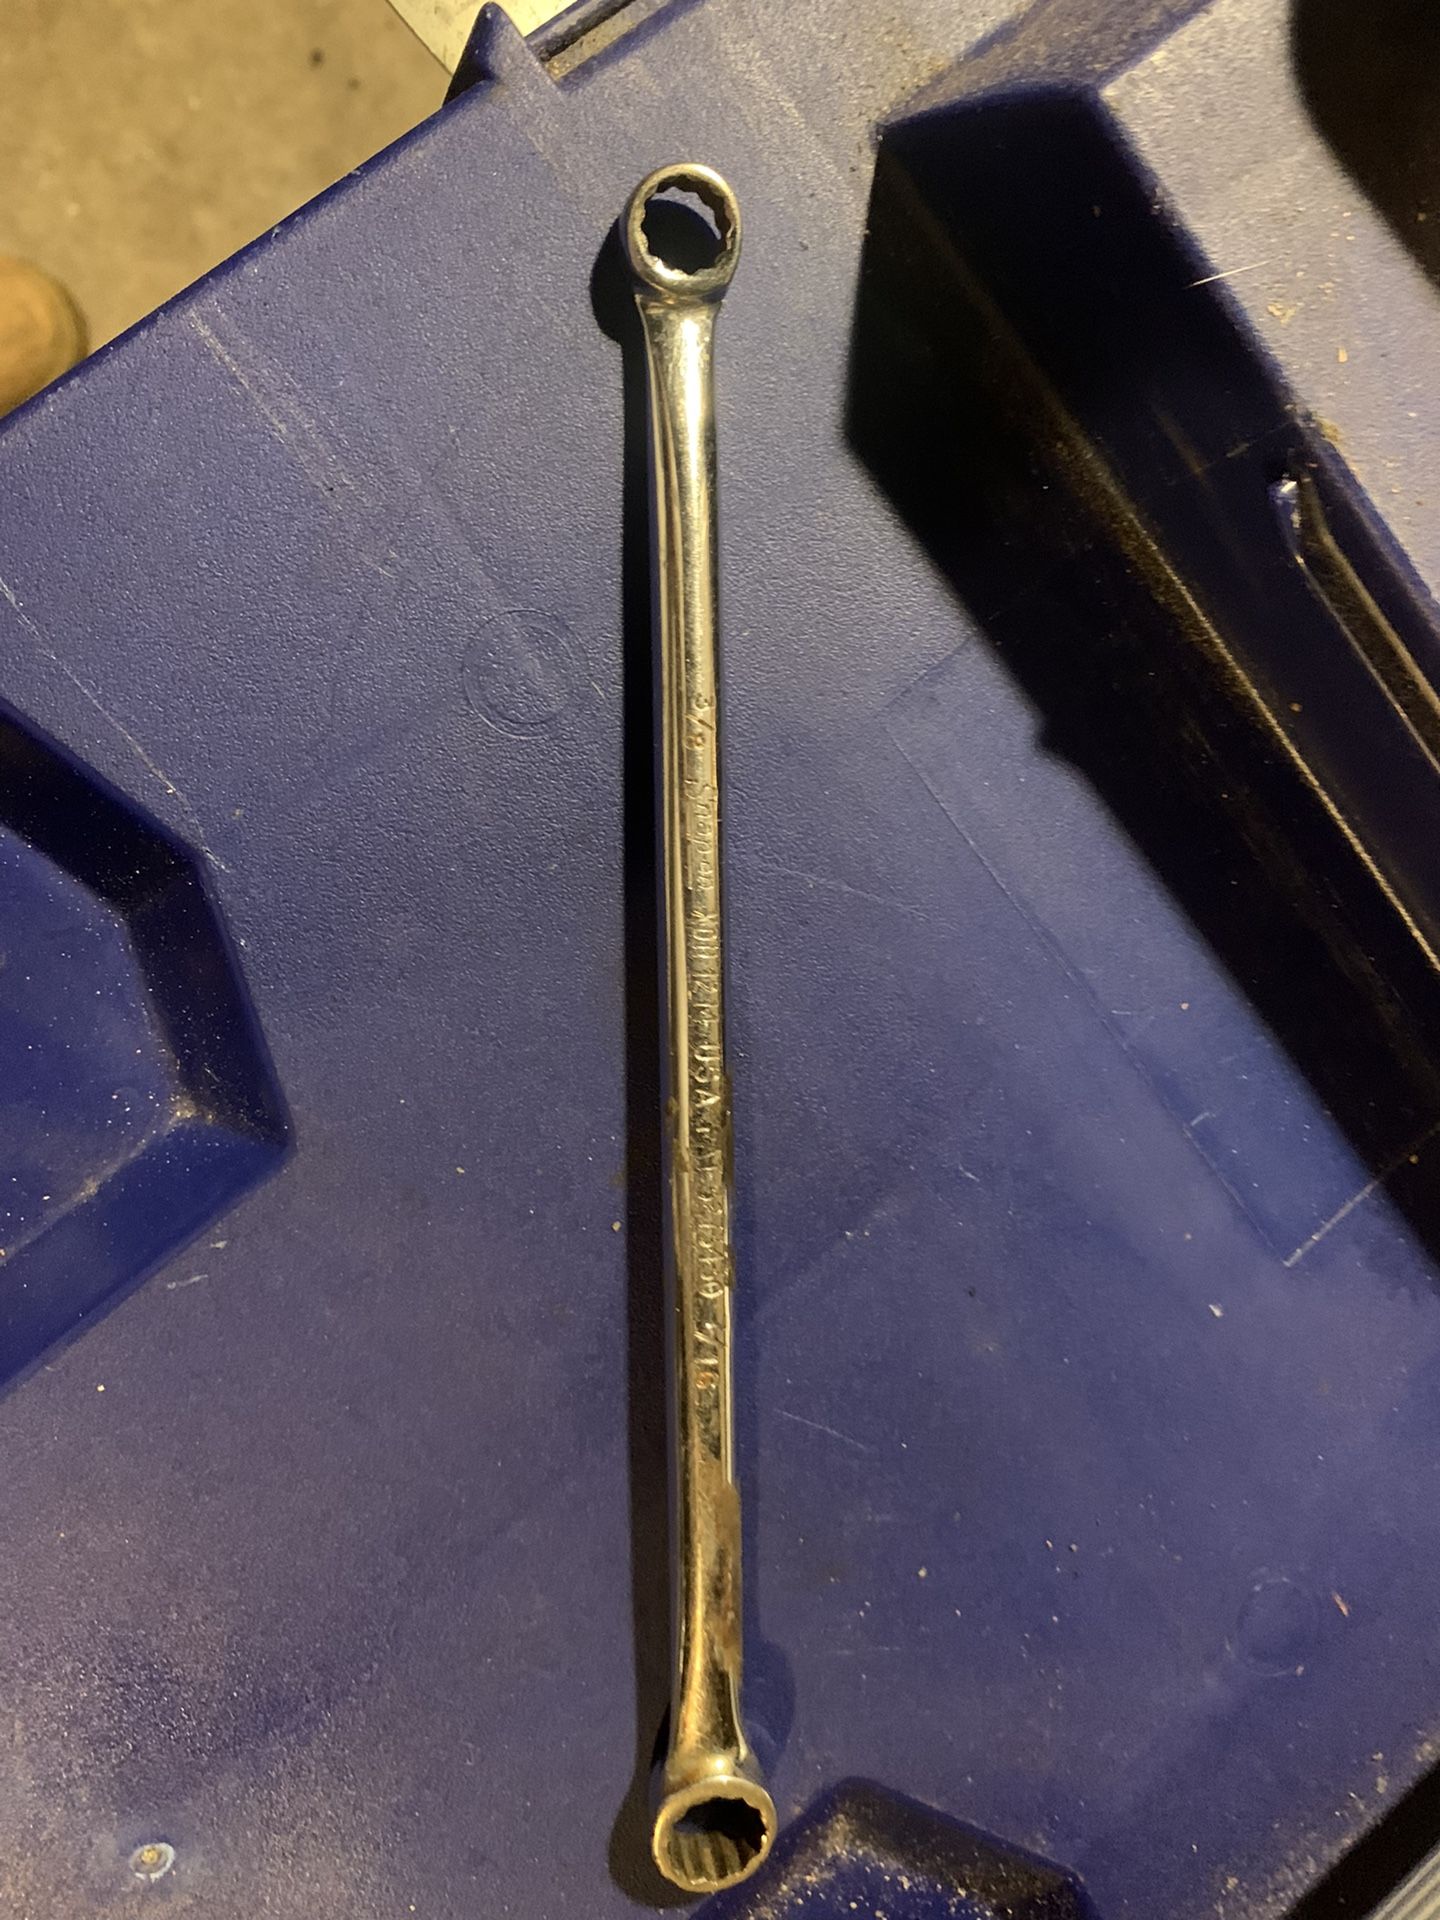 Snap-on Wrench